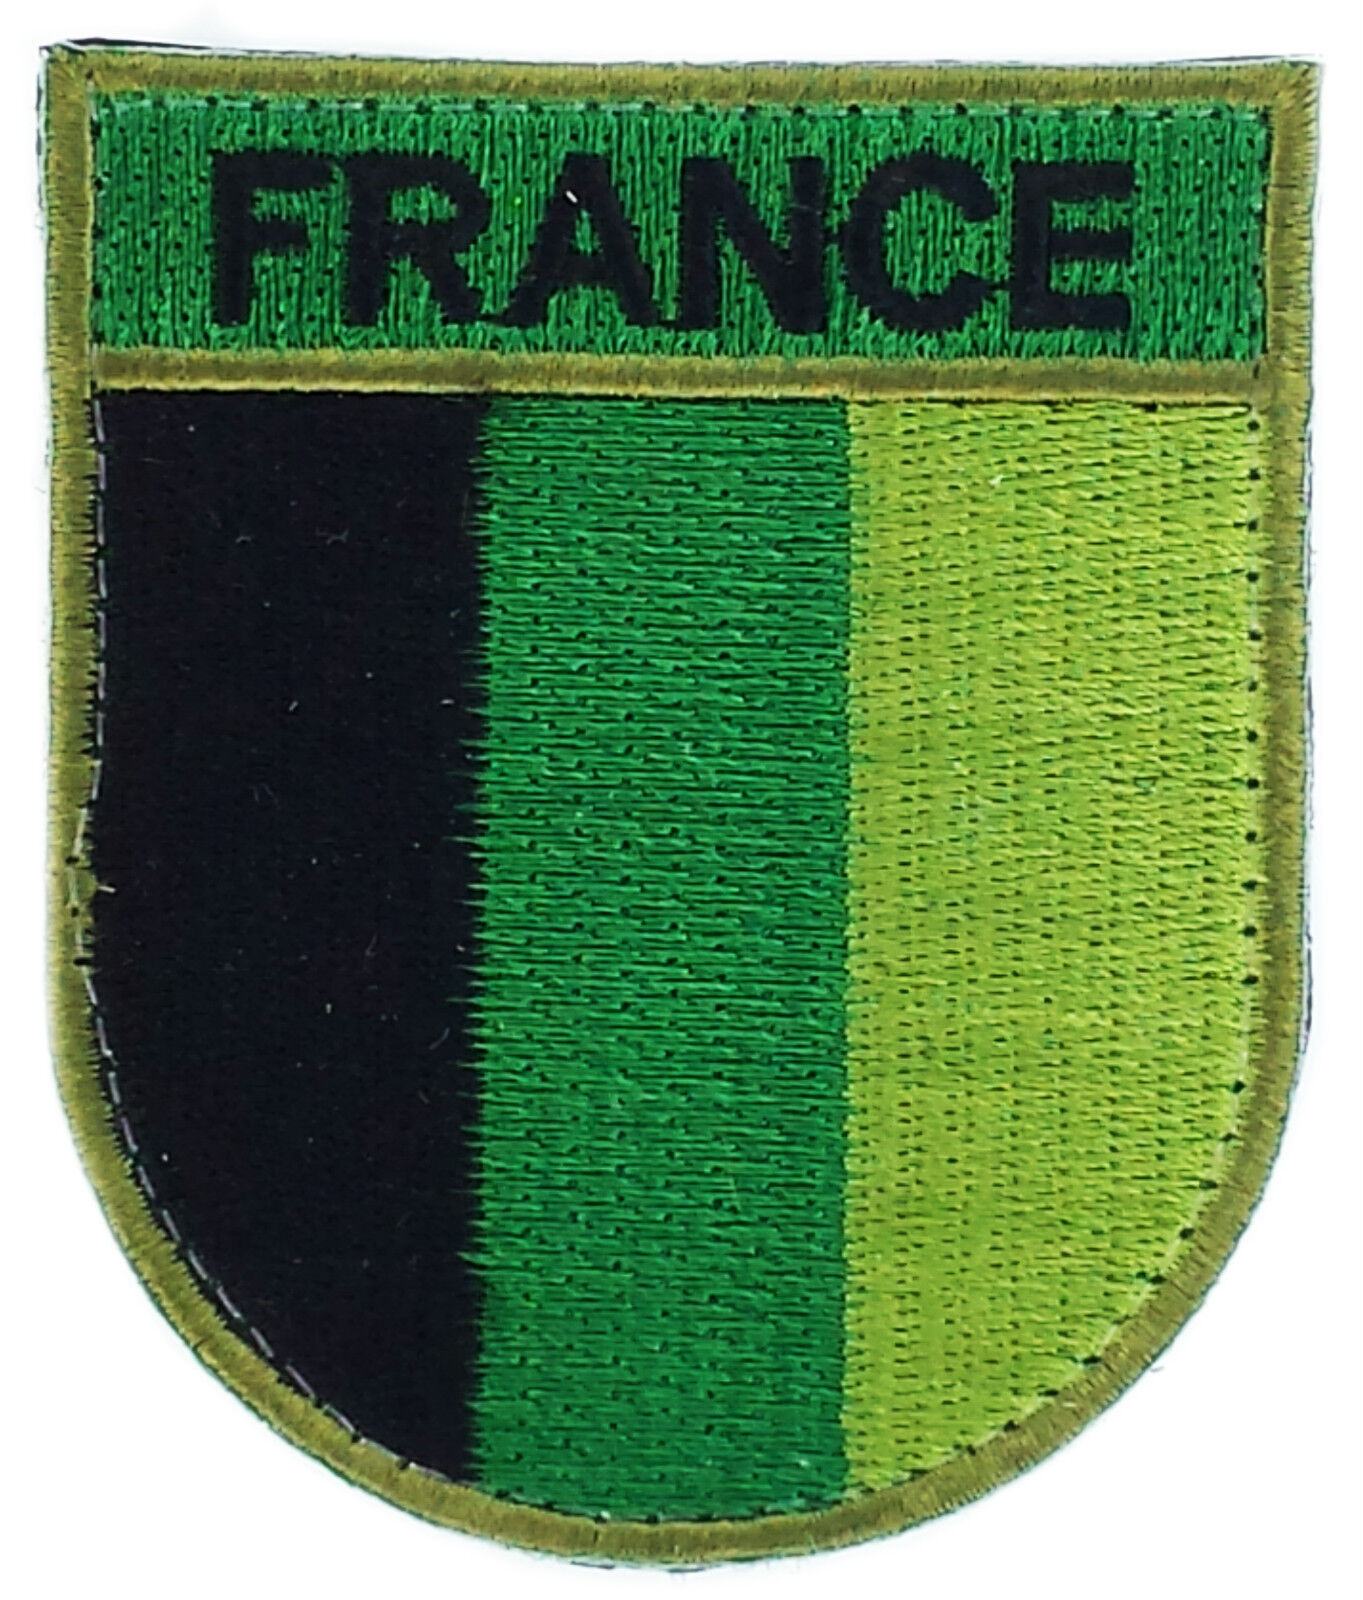 FRENCH FRANCE OPEX MILITARY CAMO PATCH TACTICAL BADGE COMBAT ARMY UNIFORM